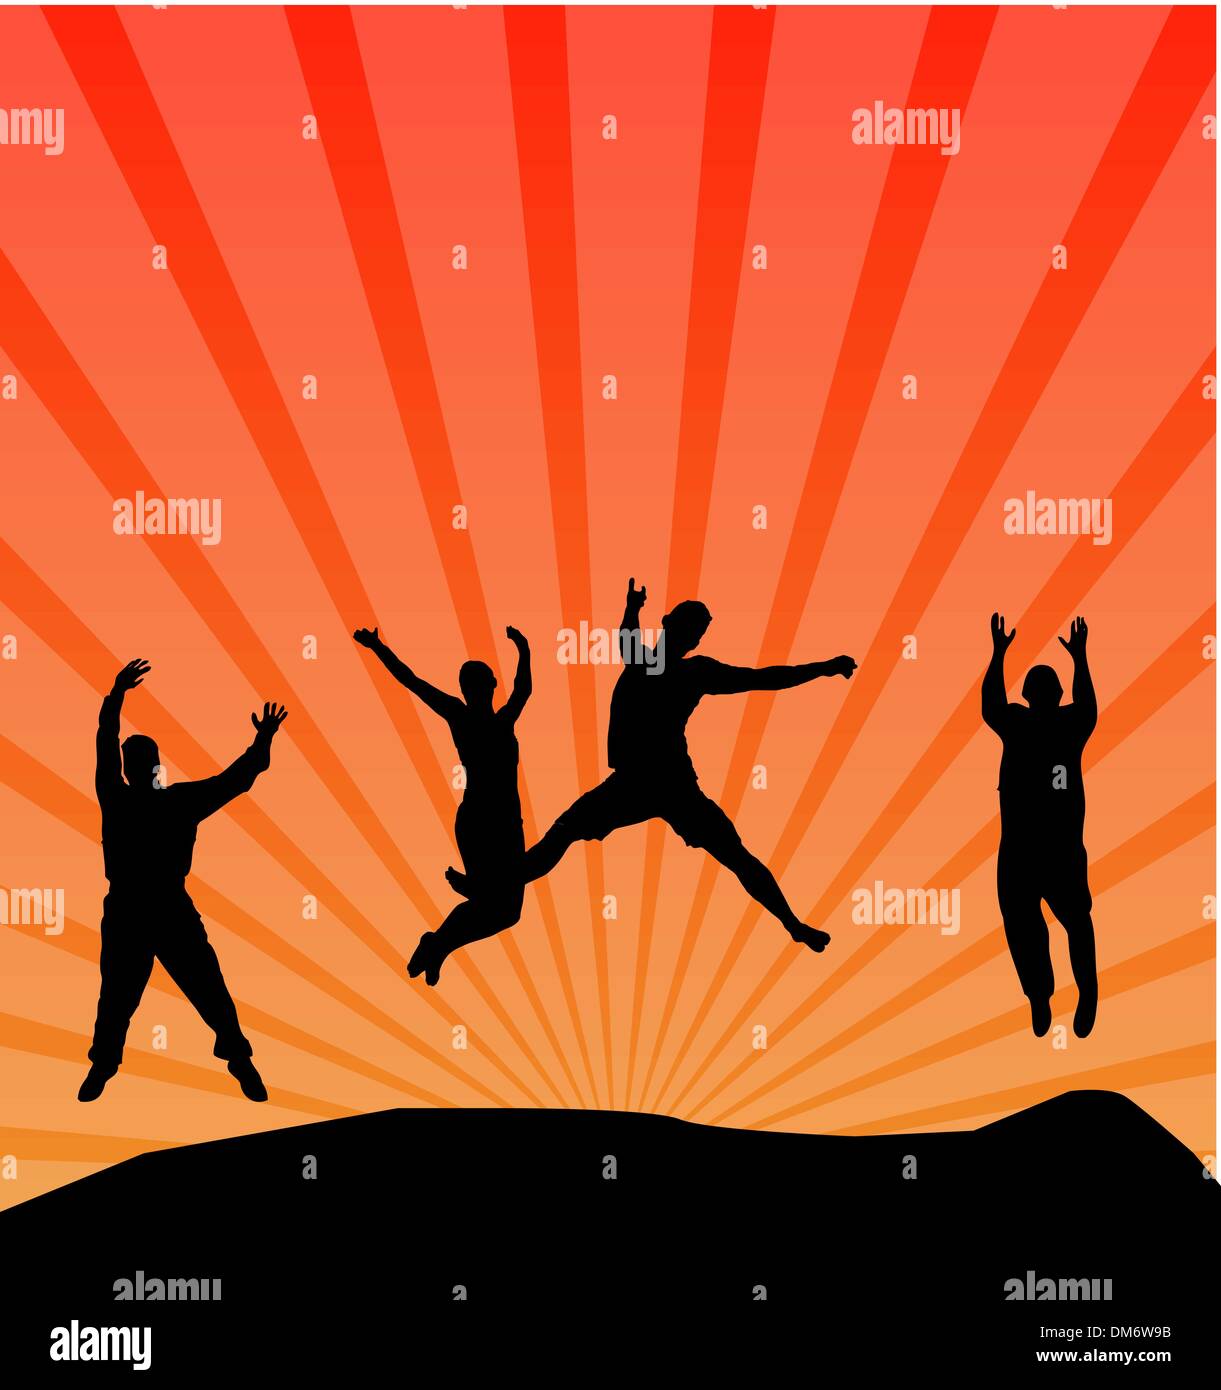 jumping people Stock Vector